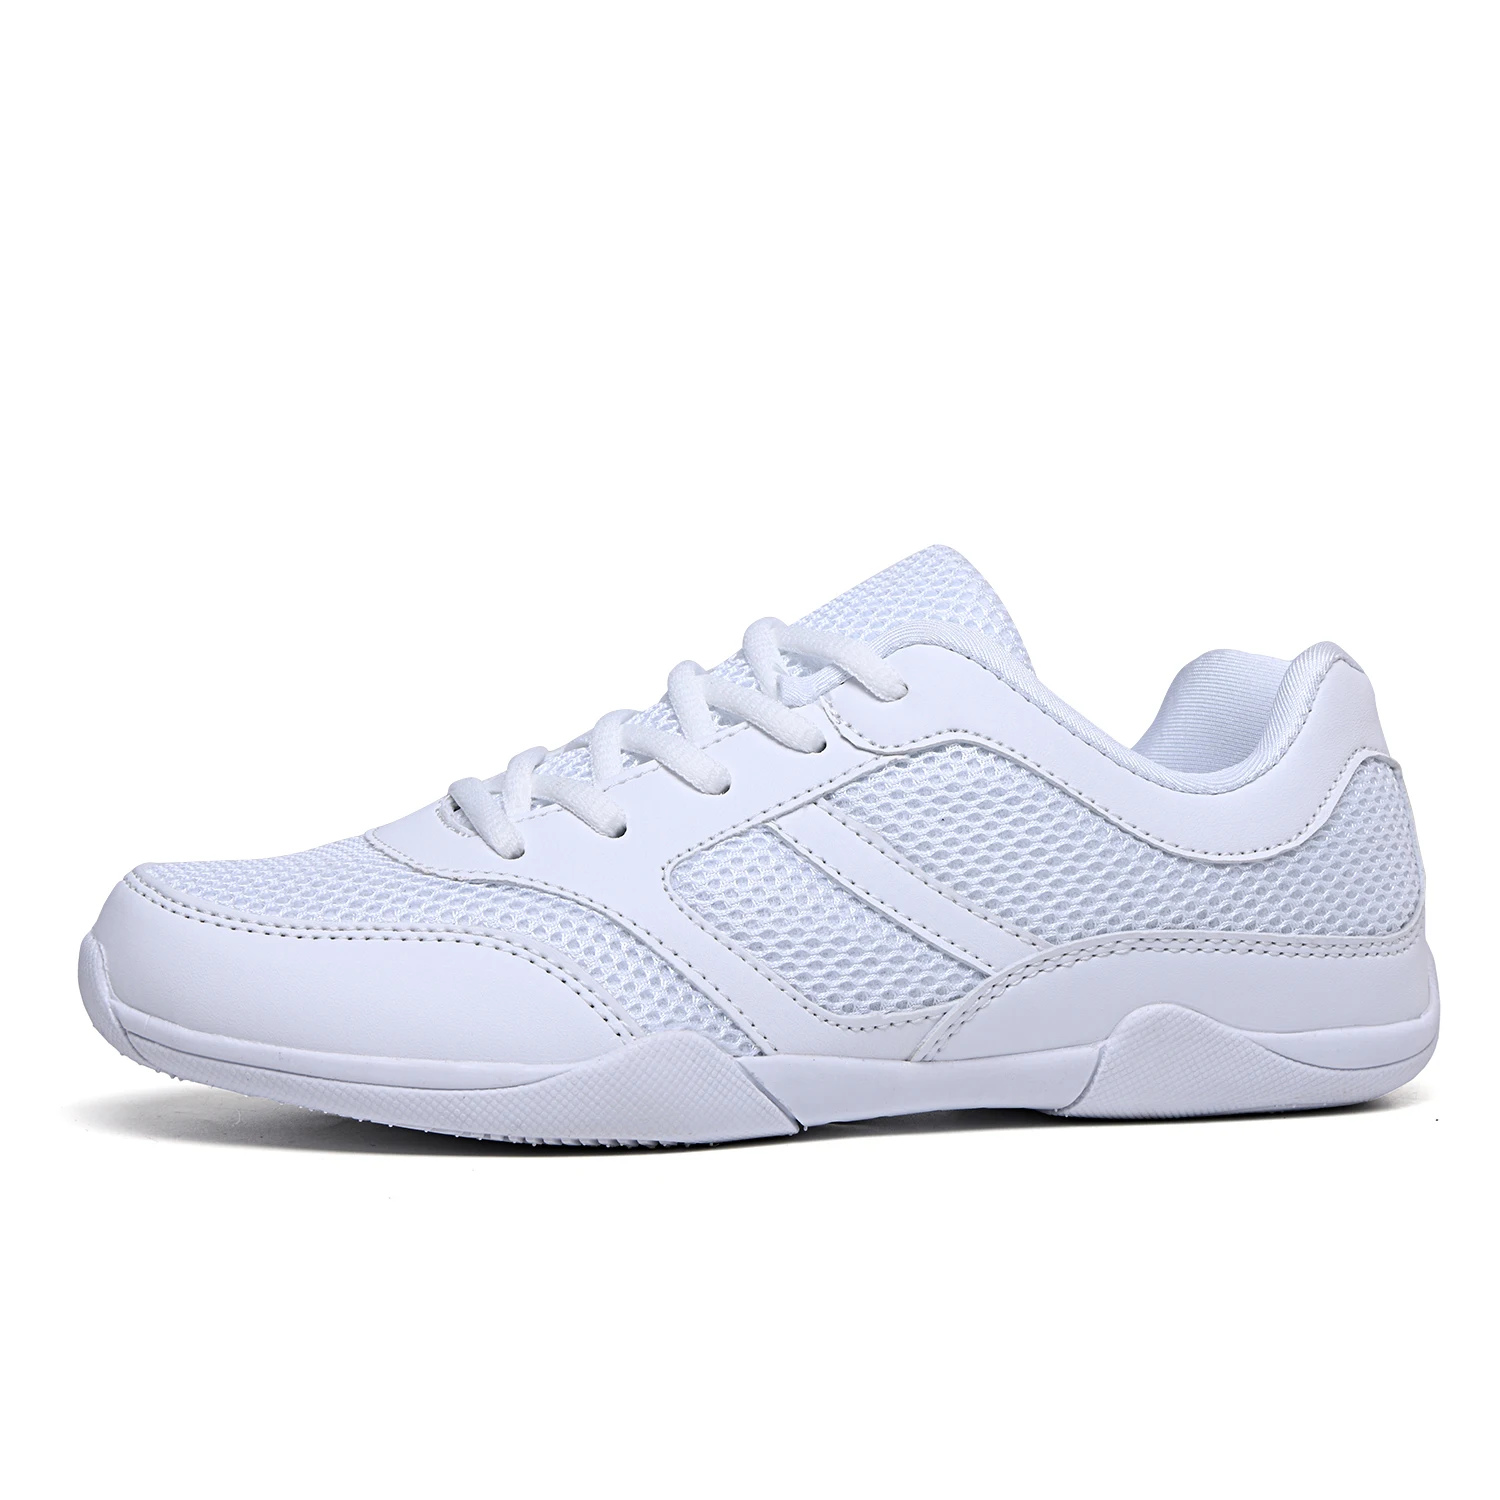 Factory Youth Dance Cheer Sneaker 